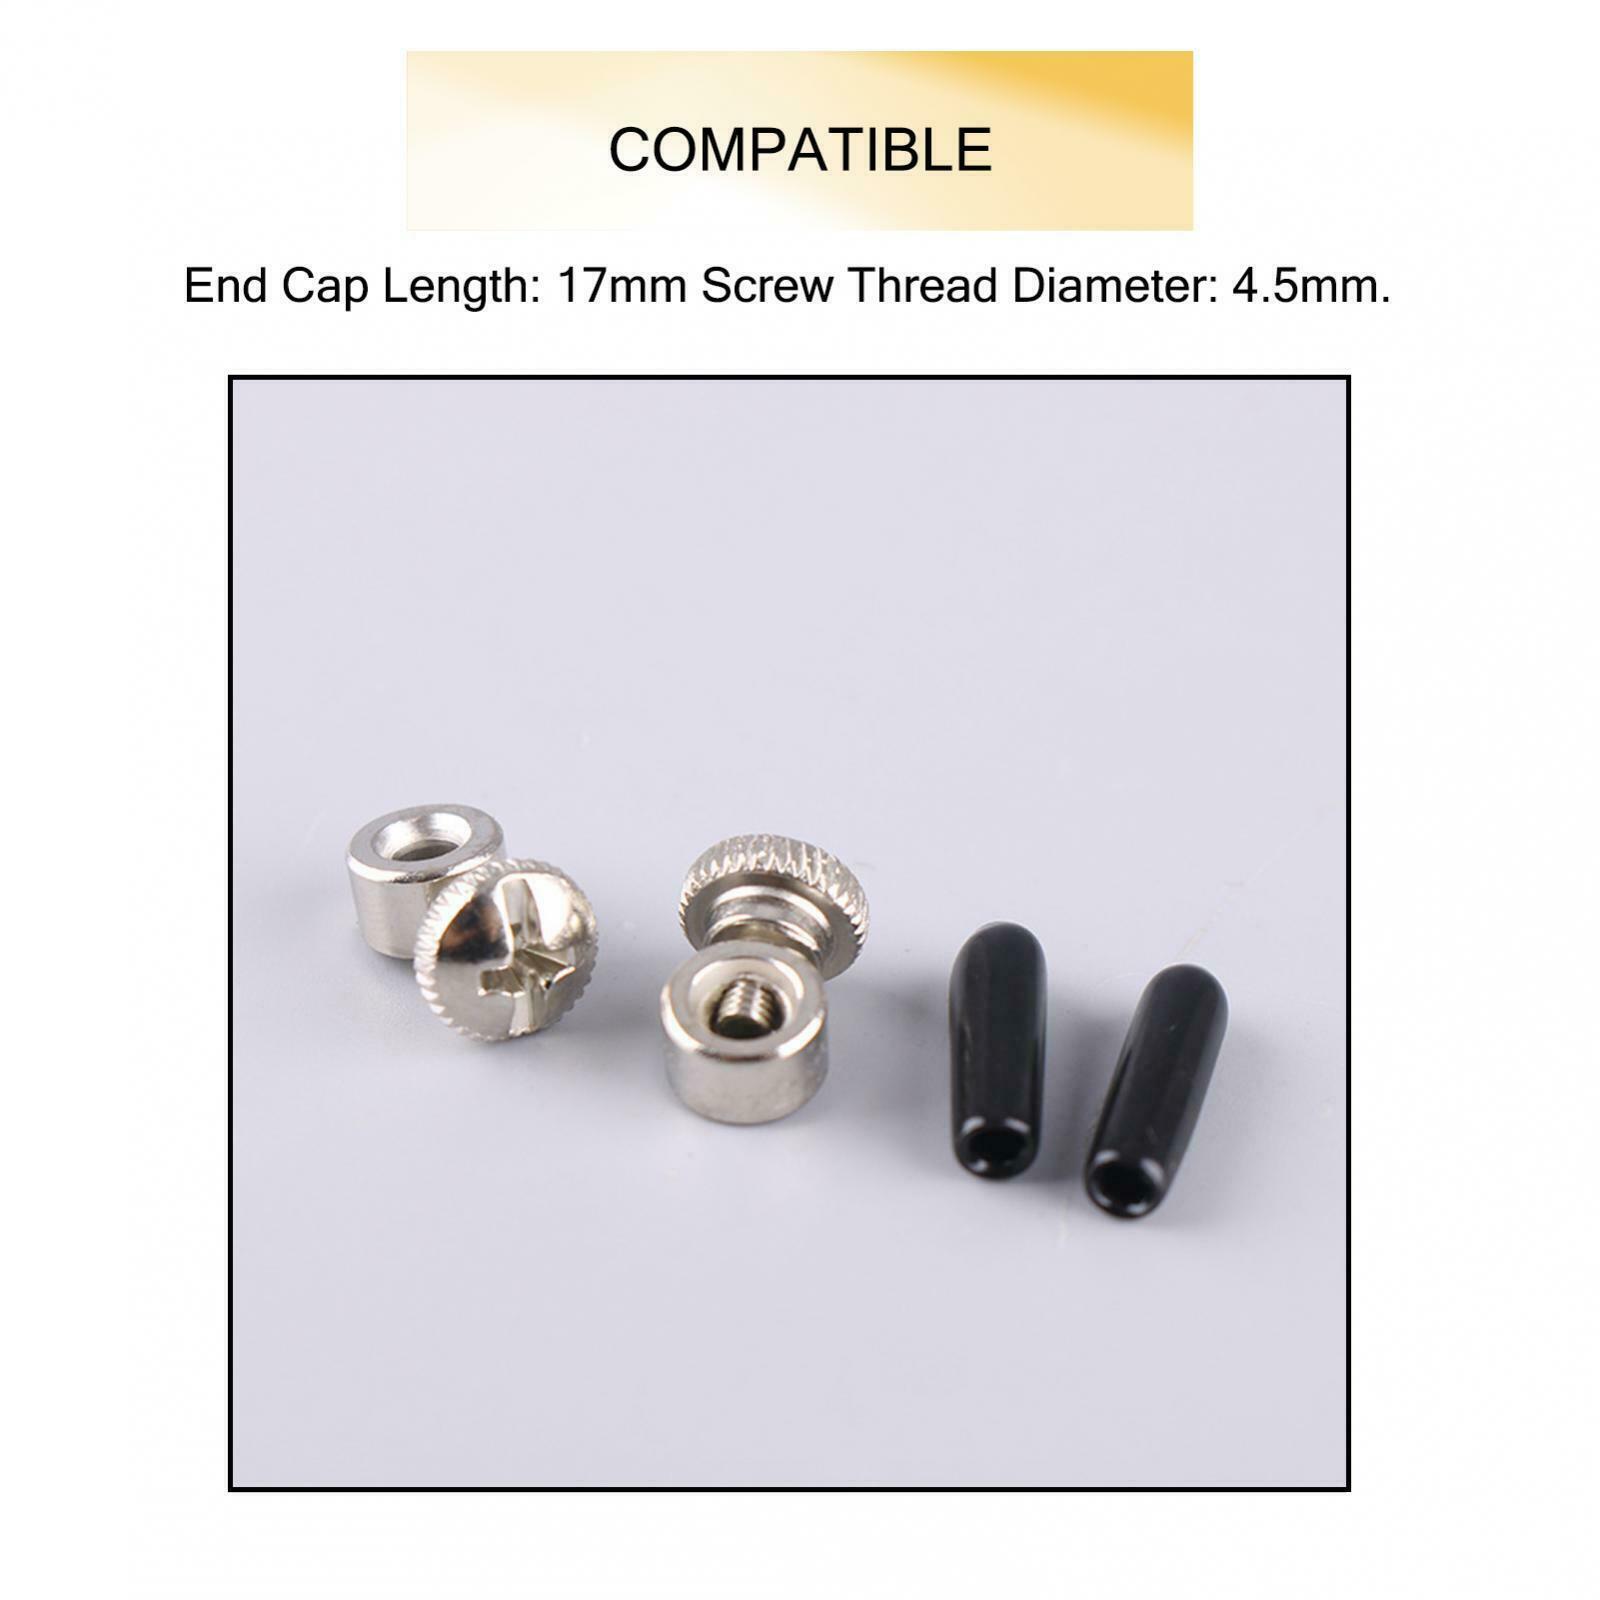 5 Sets Replacement Adjustable Screws and End Caps, Replacement Parts Kit for